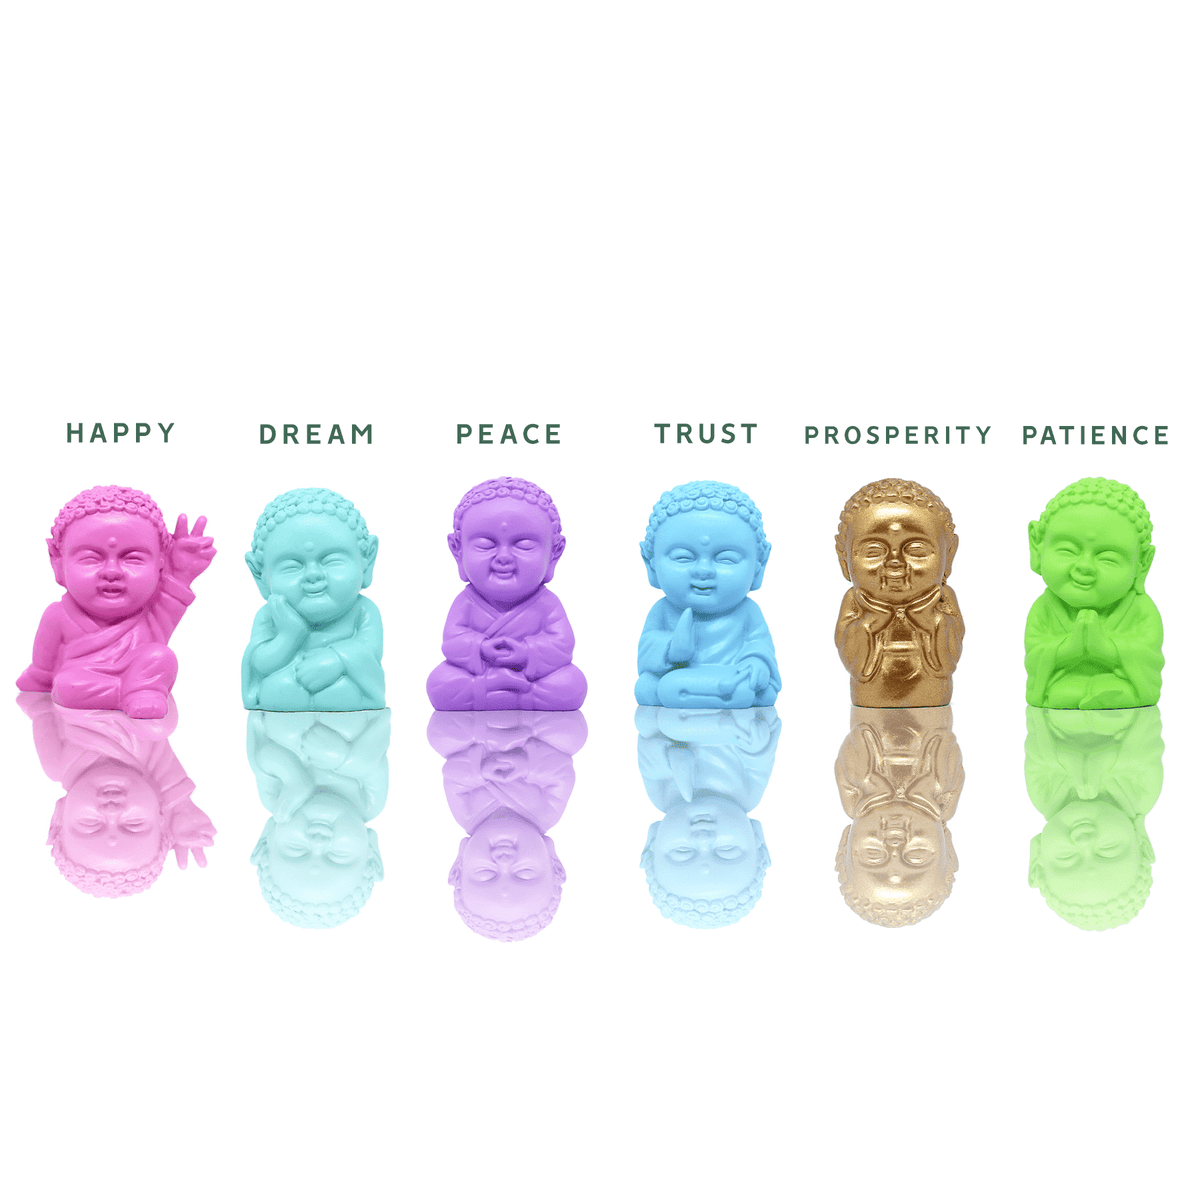 Baby Buddha Statues - Pack of 6 Dainty Home Decor MaeMae Jewelry | Baby Buddha Statues - Pack of 6